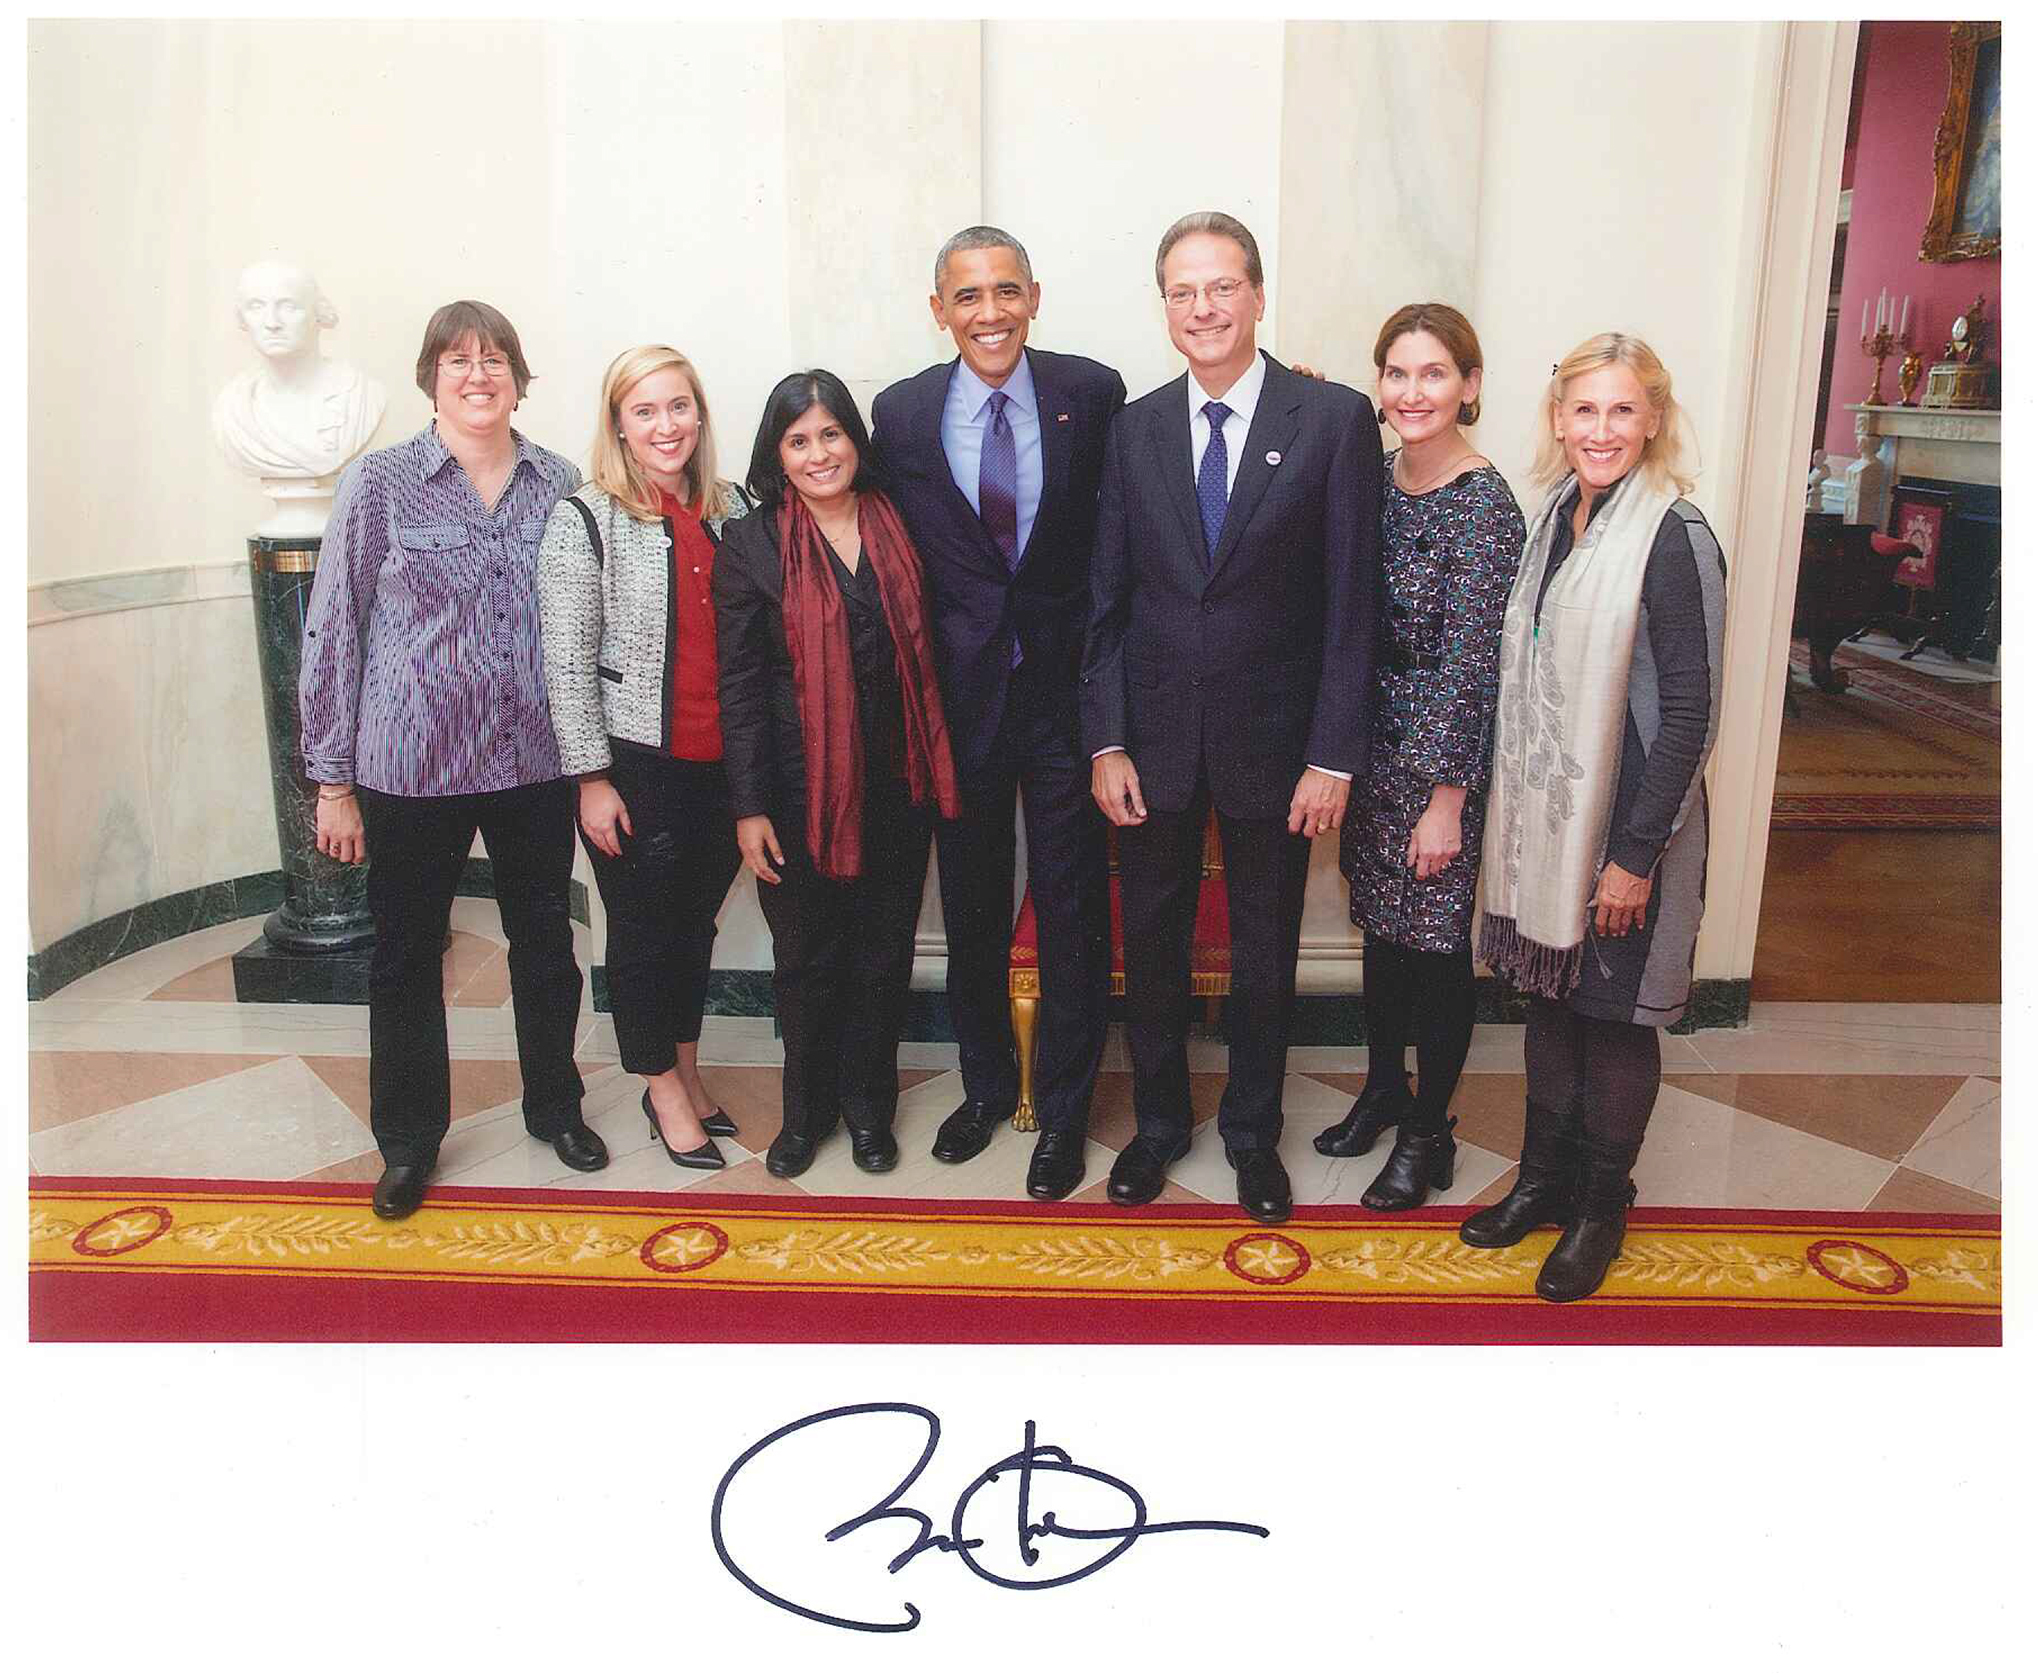 Society staff and CEO meet President Obama at the White House